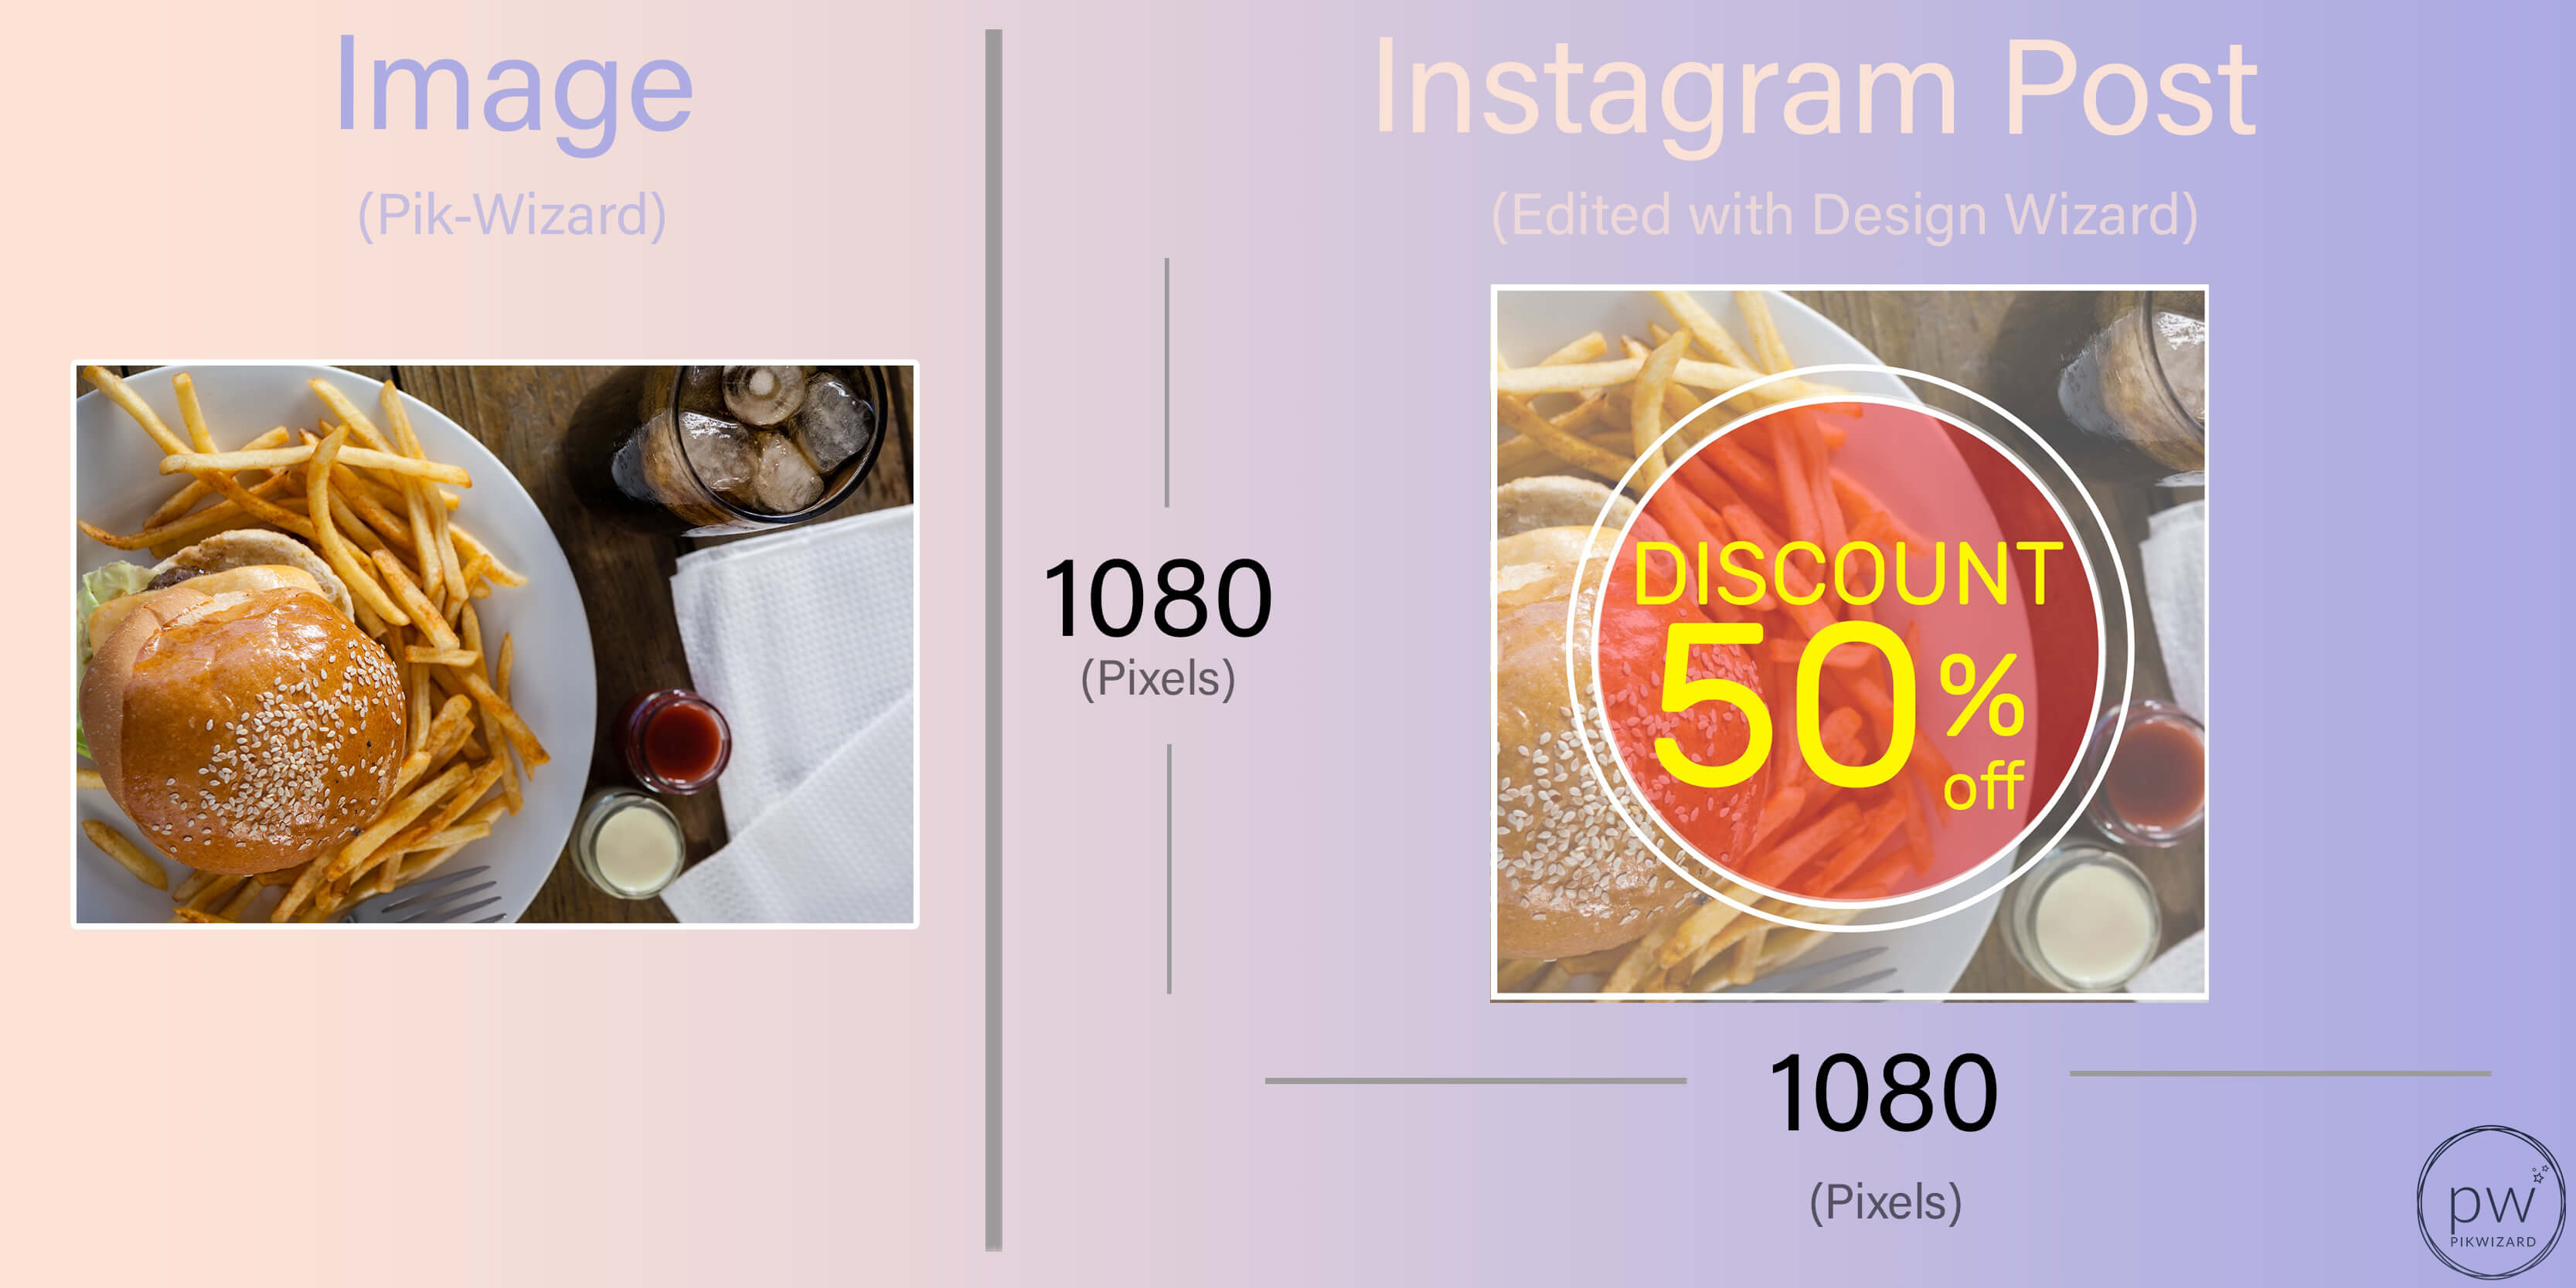 Side by side stock image and edited instagram post of a food discount - A complete beginner's guide on how to post on Instagram from a PC or Mac - Image